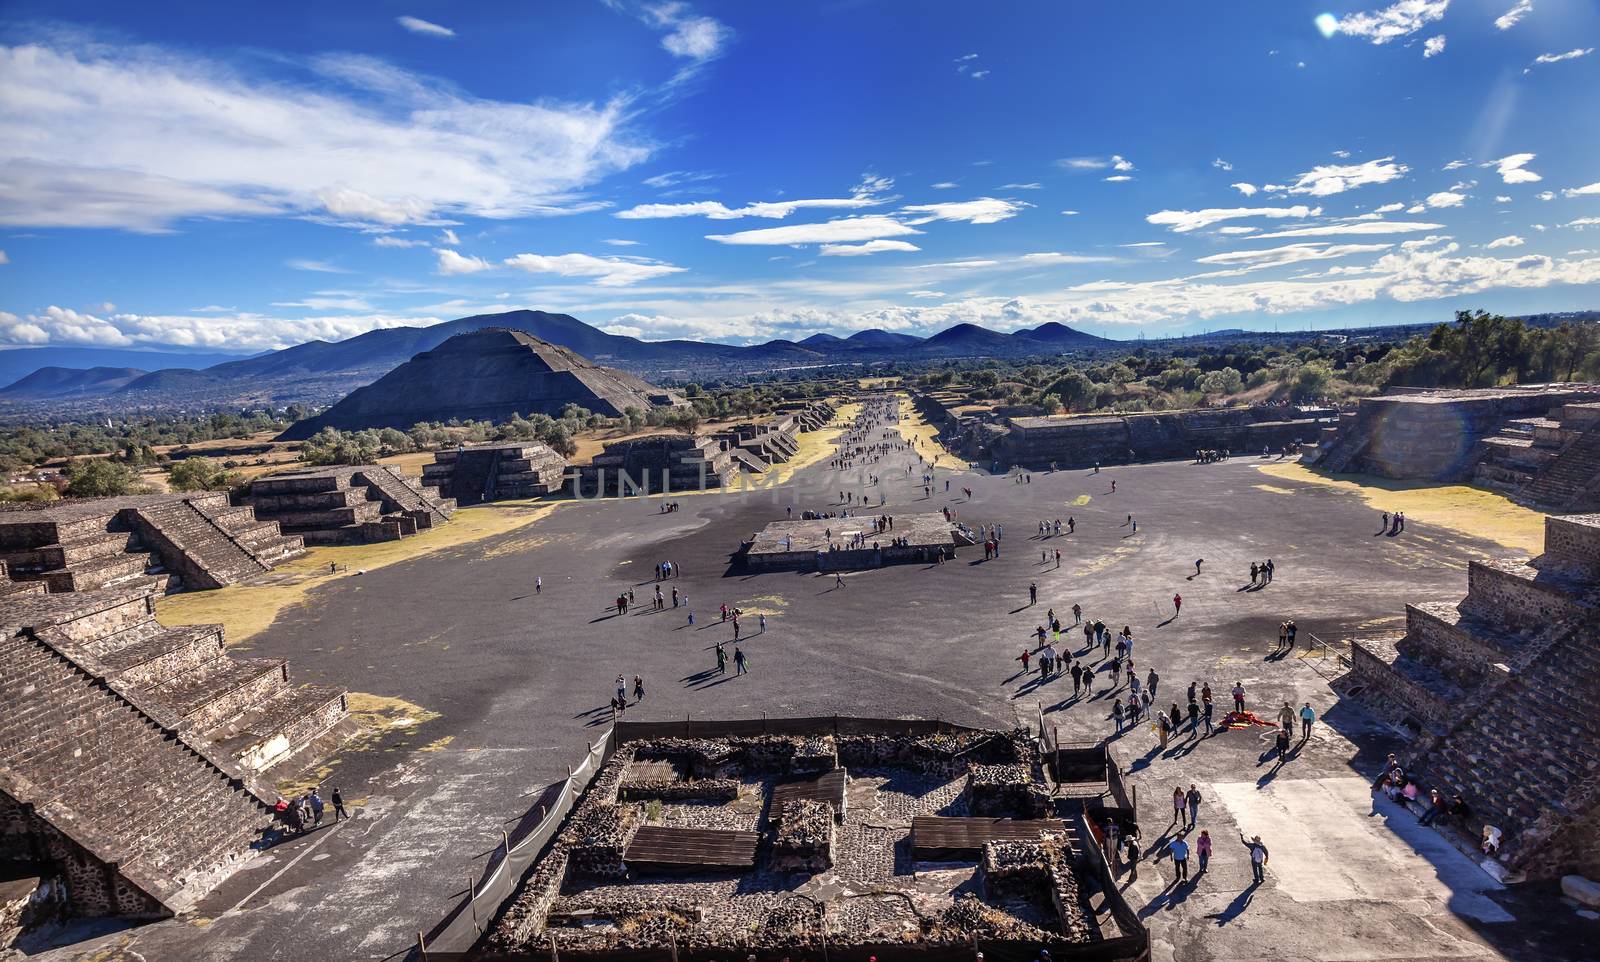 Avenue of Dead and Sun Pyramid, Teotihuacan, Mexico